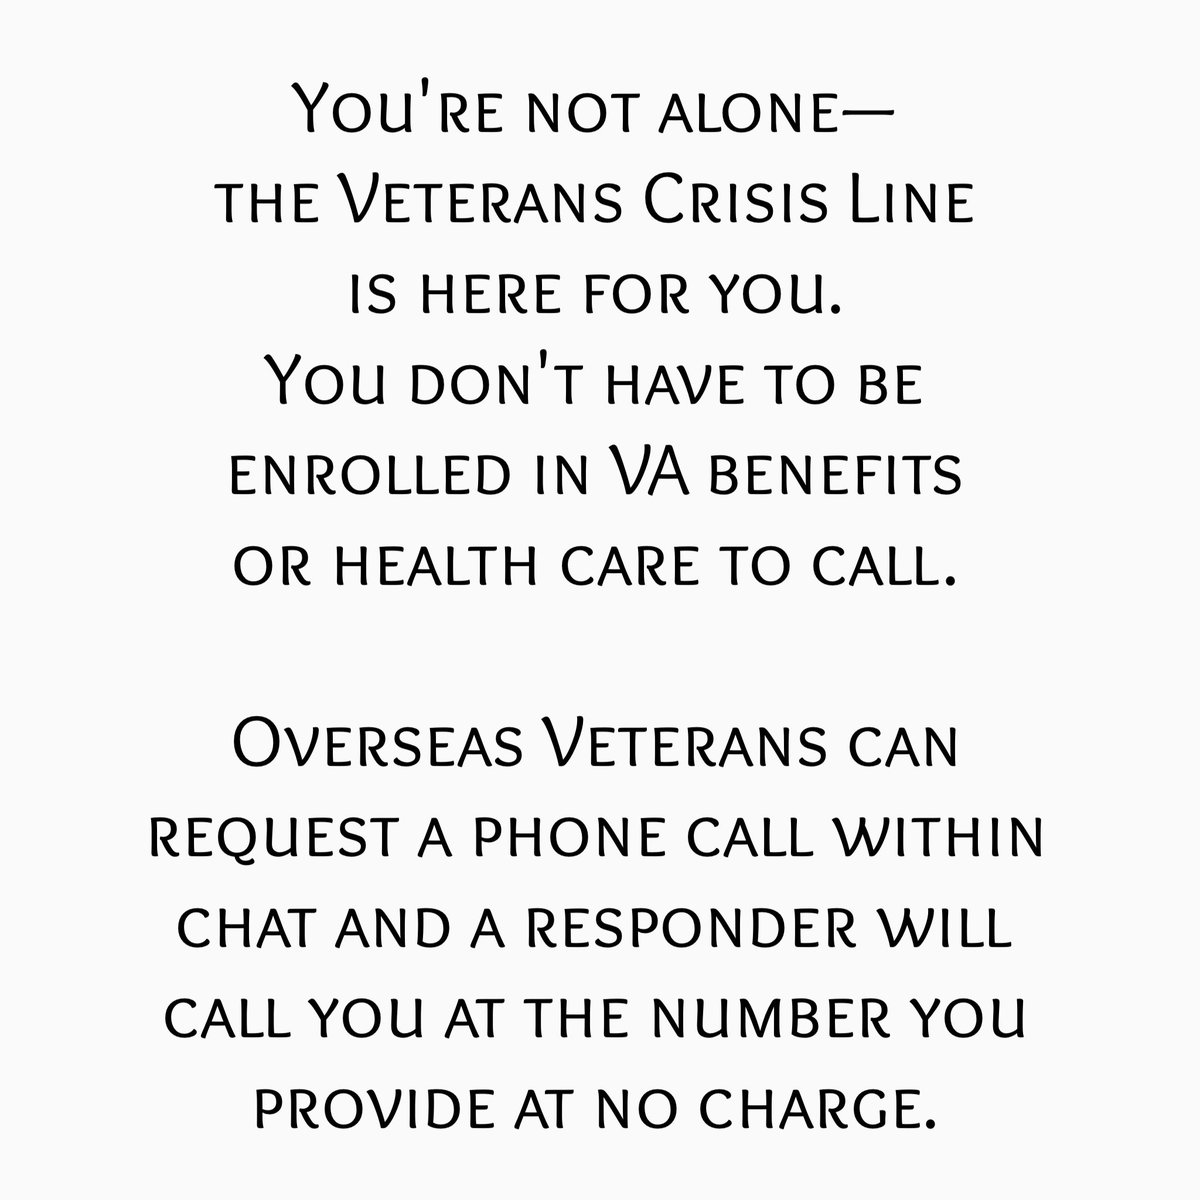 Please don't politicize One Veteran suicide is one too many. Share these numbers and show our veterans & troops we care and they're not alone. Veteran Crisis Line Call: 988 Press 1 or 800-273-8255 Press 1 Text 838255 Connect Online: veteranscrisisline.net